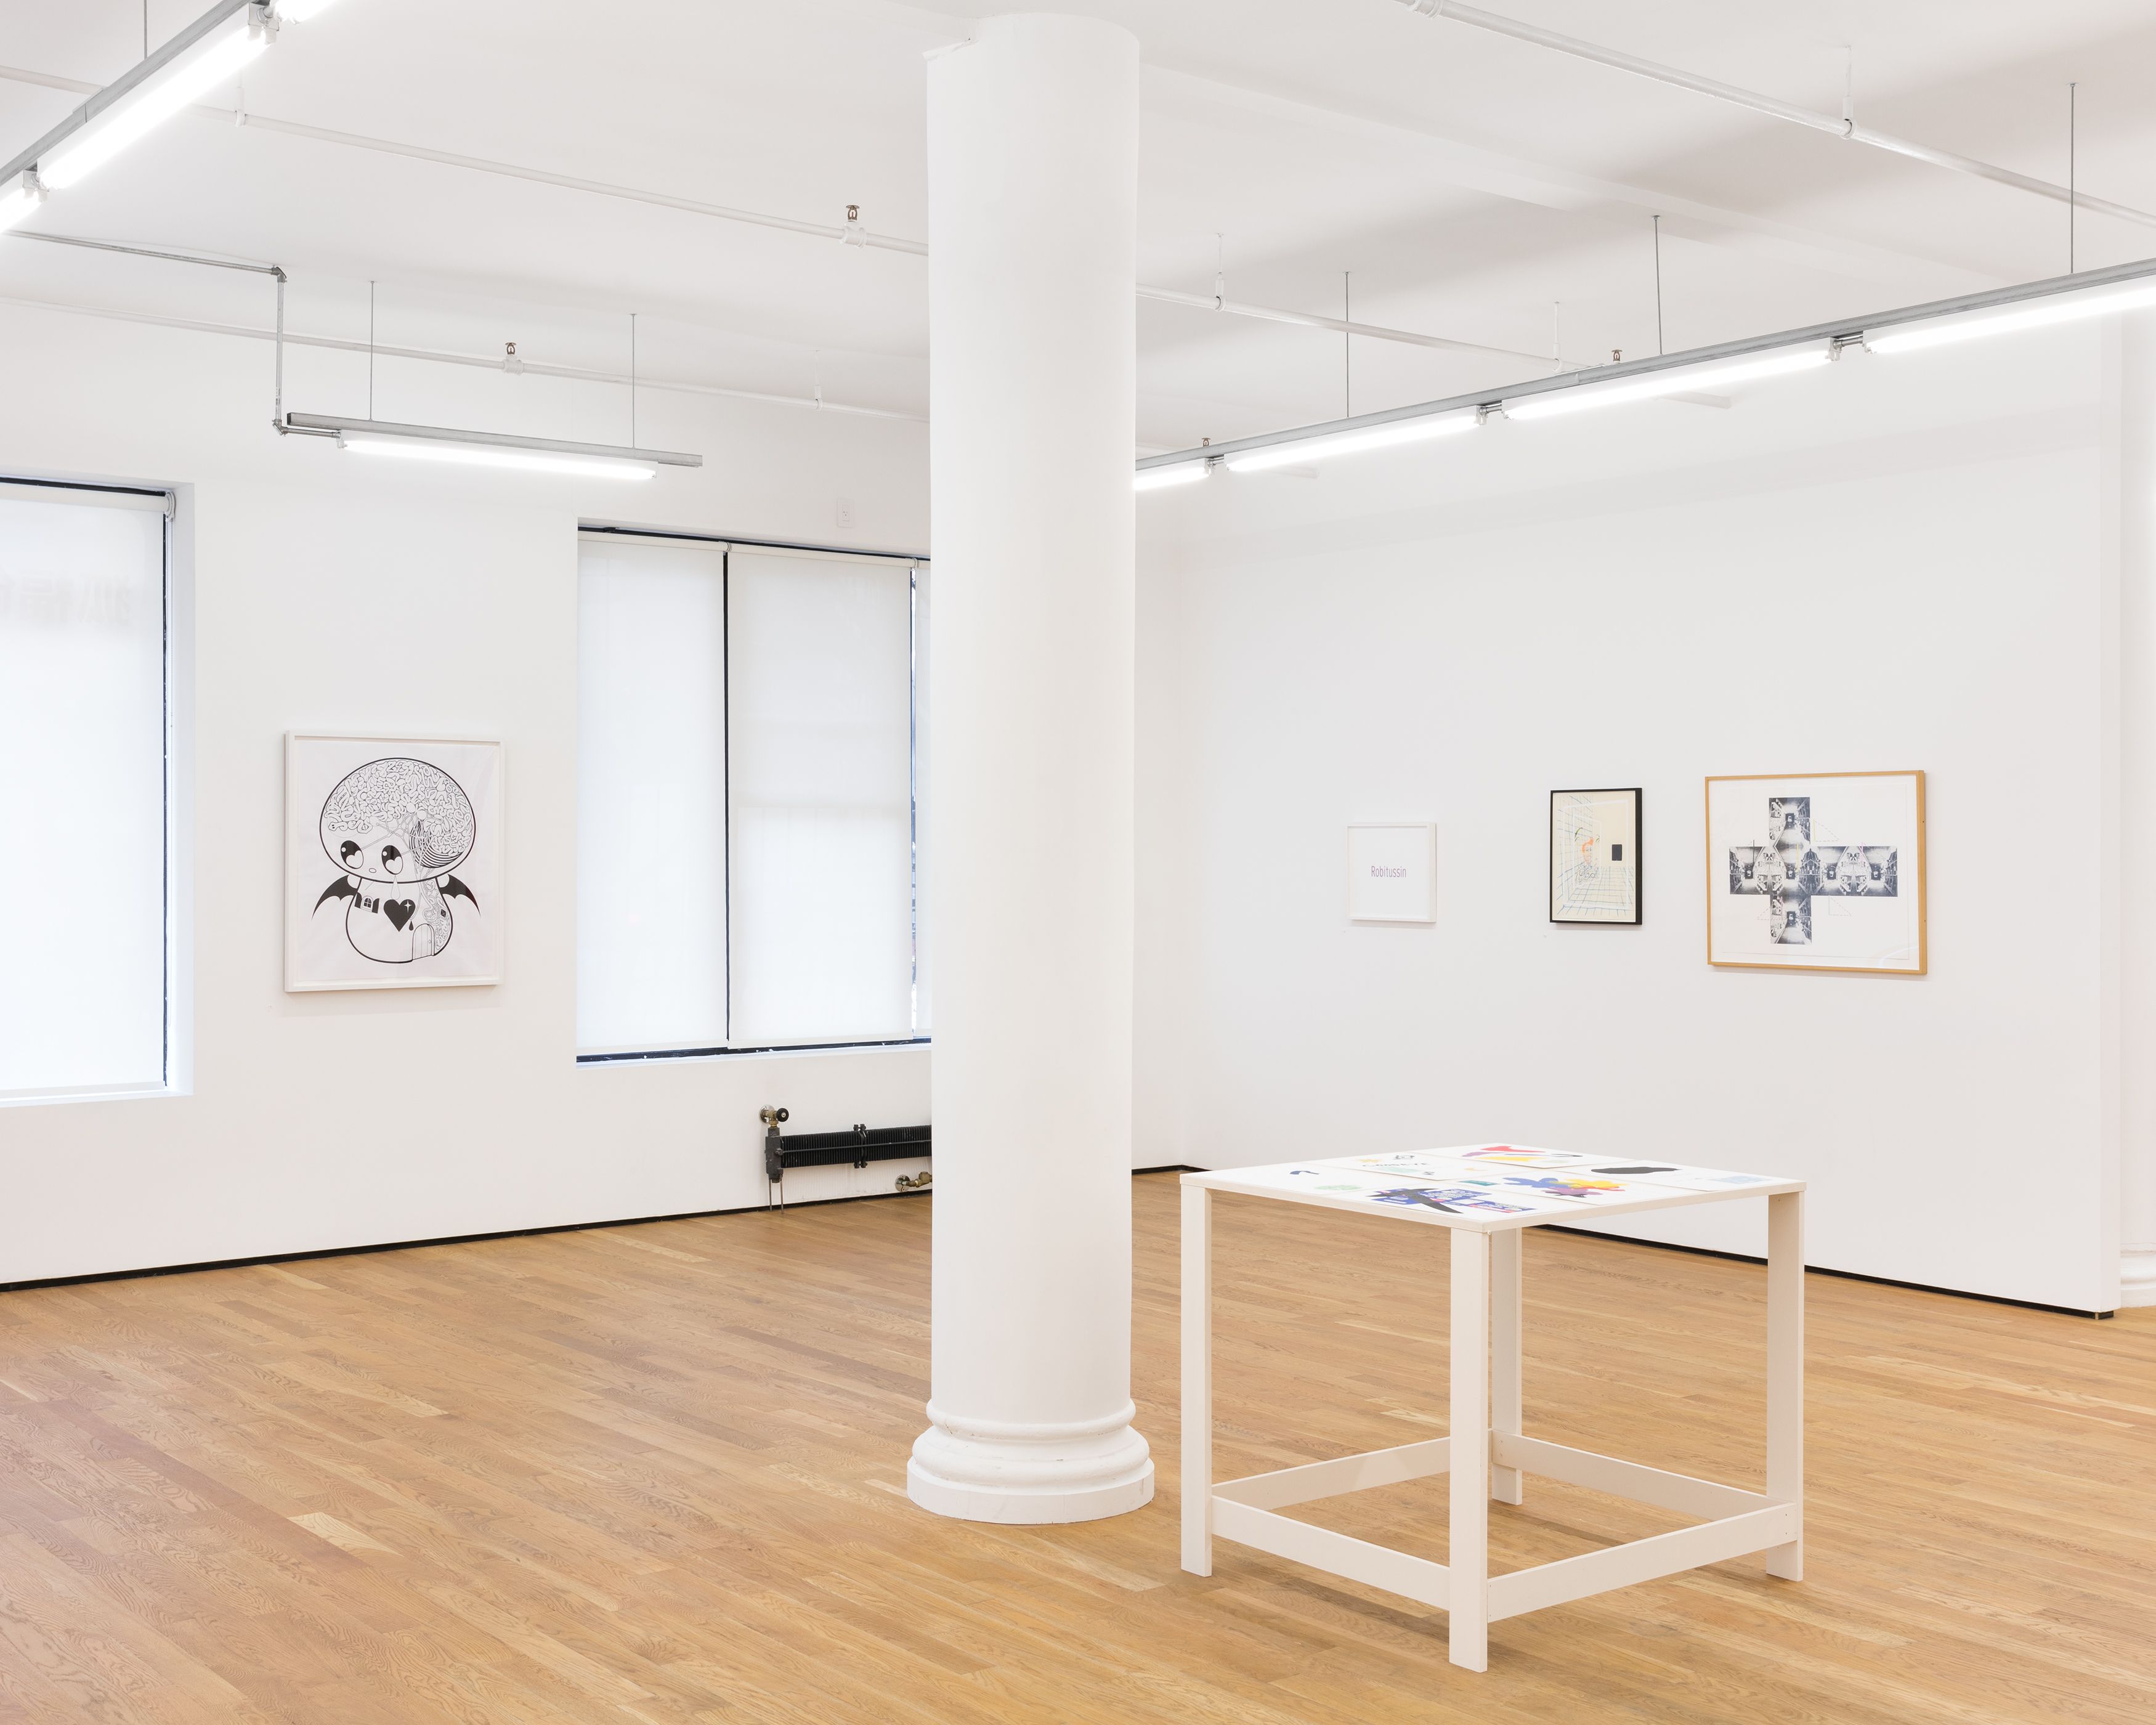 Marginal Editions / Ten Marginal Years, 2018, installation view, Foxy Production, New York